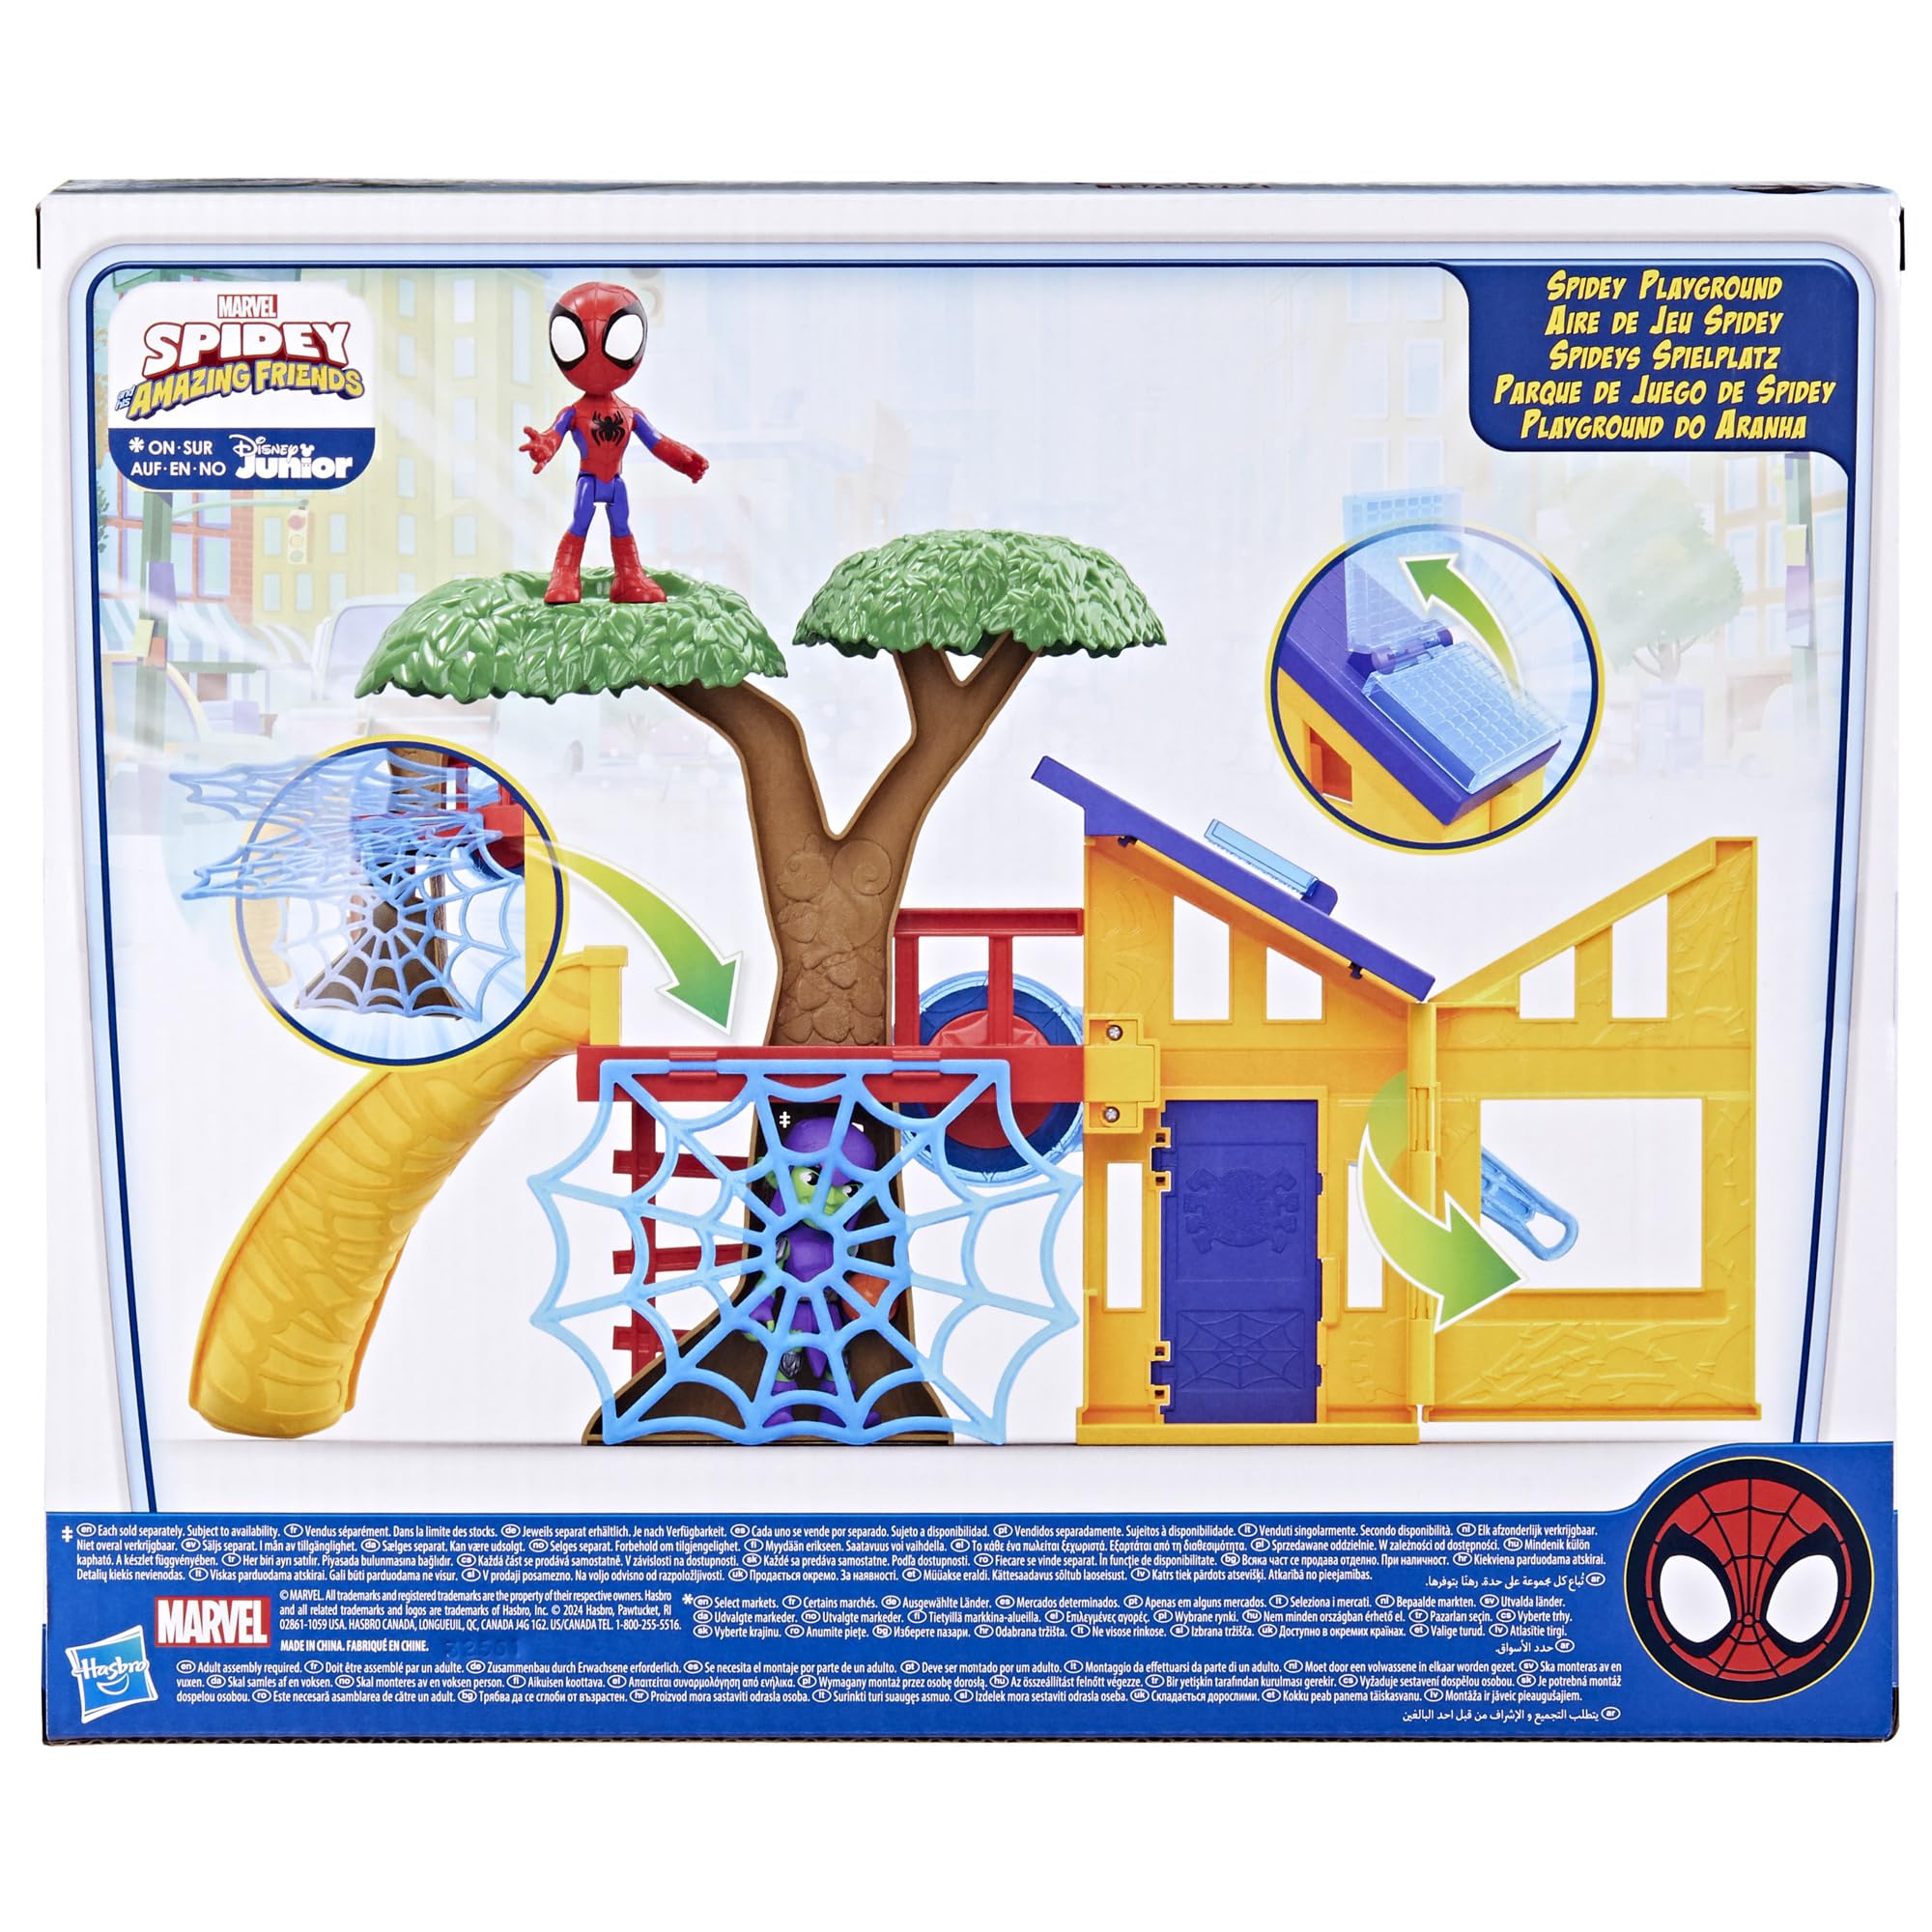 SPIDEY AND HIS AMAZING FRIENDS Spidey Playground Playset, Includes 4-Inch Action Figure, Marvel Super Hero Toys for Kids 3 and Up